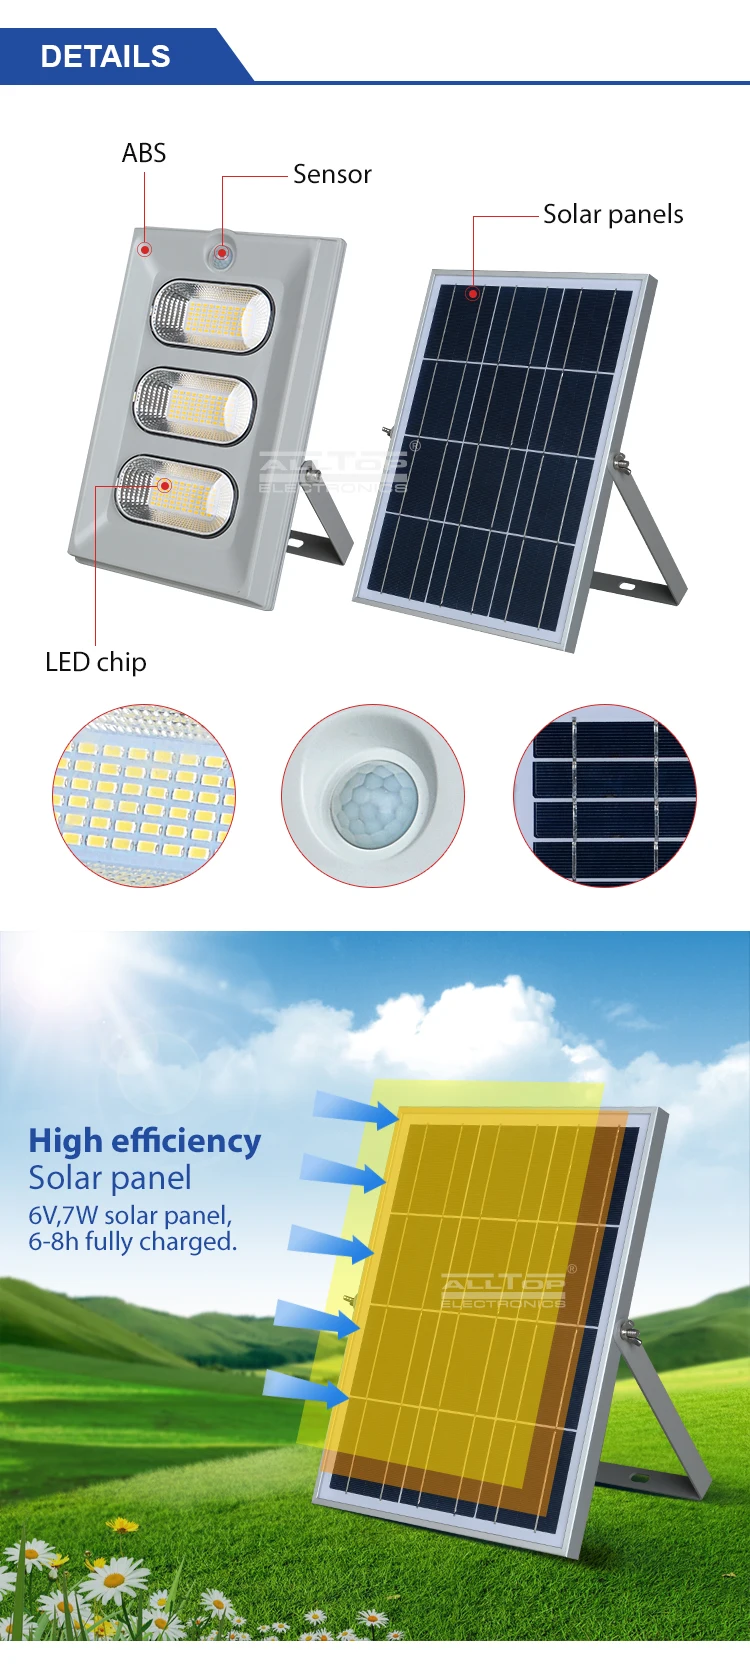 ALLTOP High quality outdoor IP65 playground 50w 100w 150w solar led flood lamp